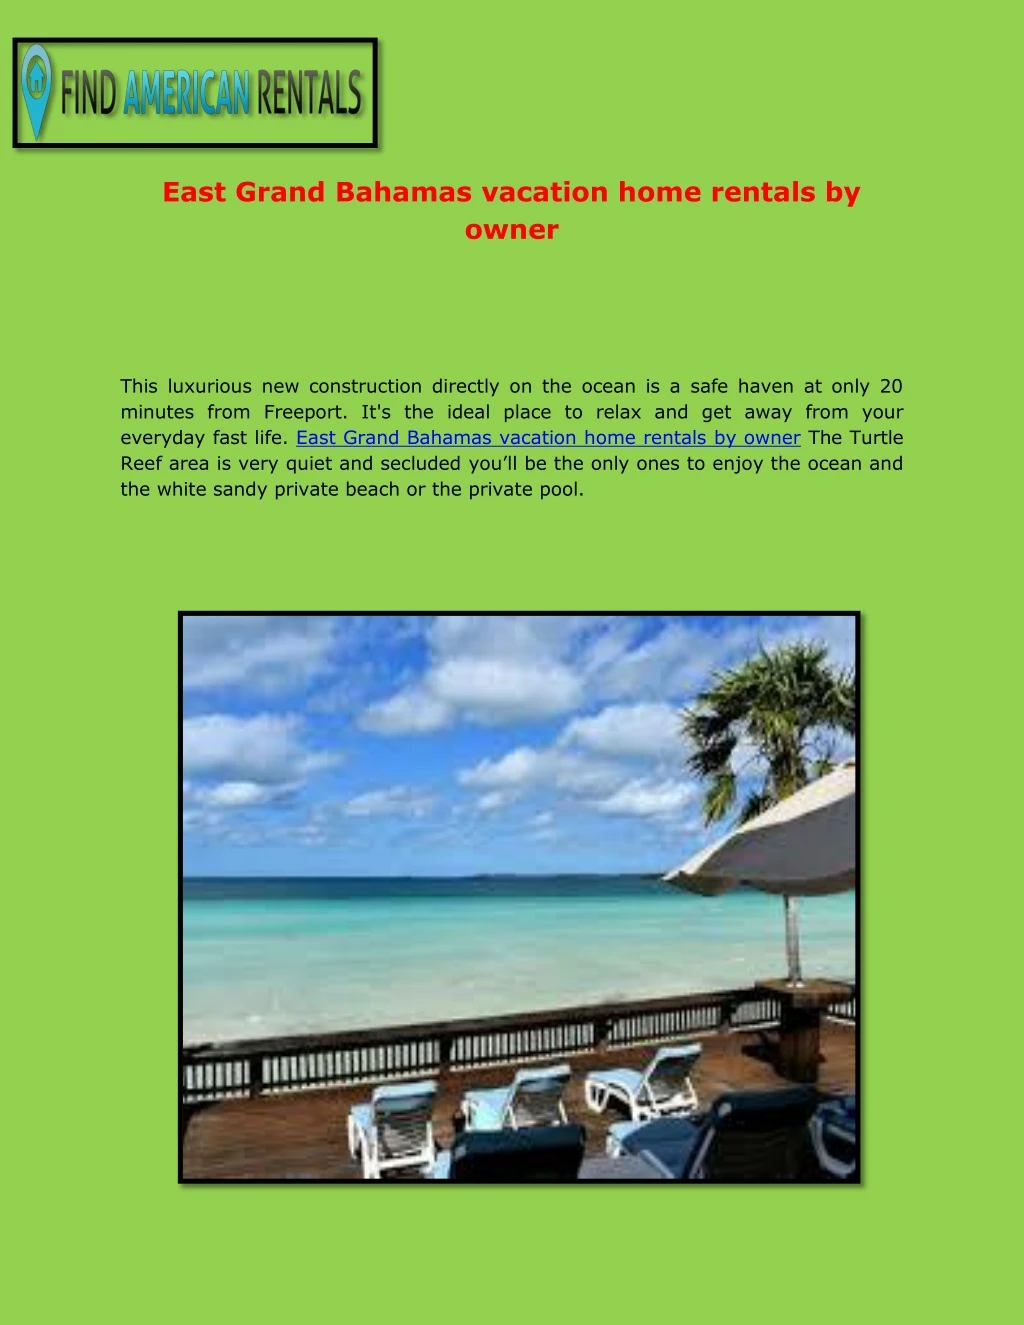 east grand bahamas vacation home rentals by owner